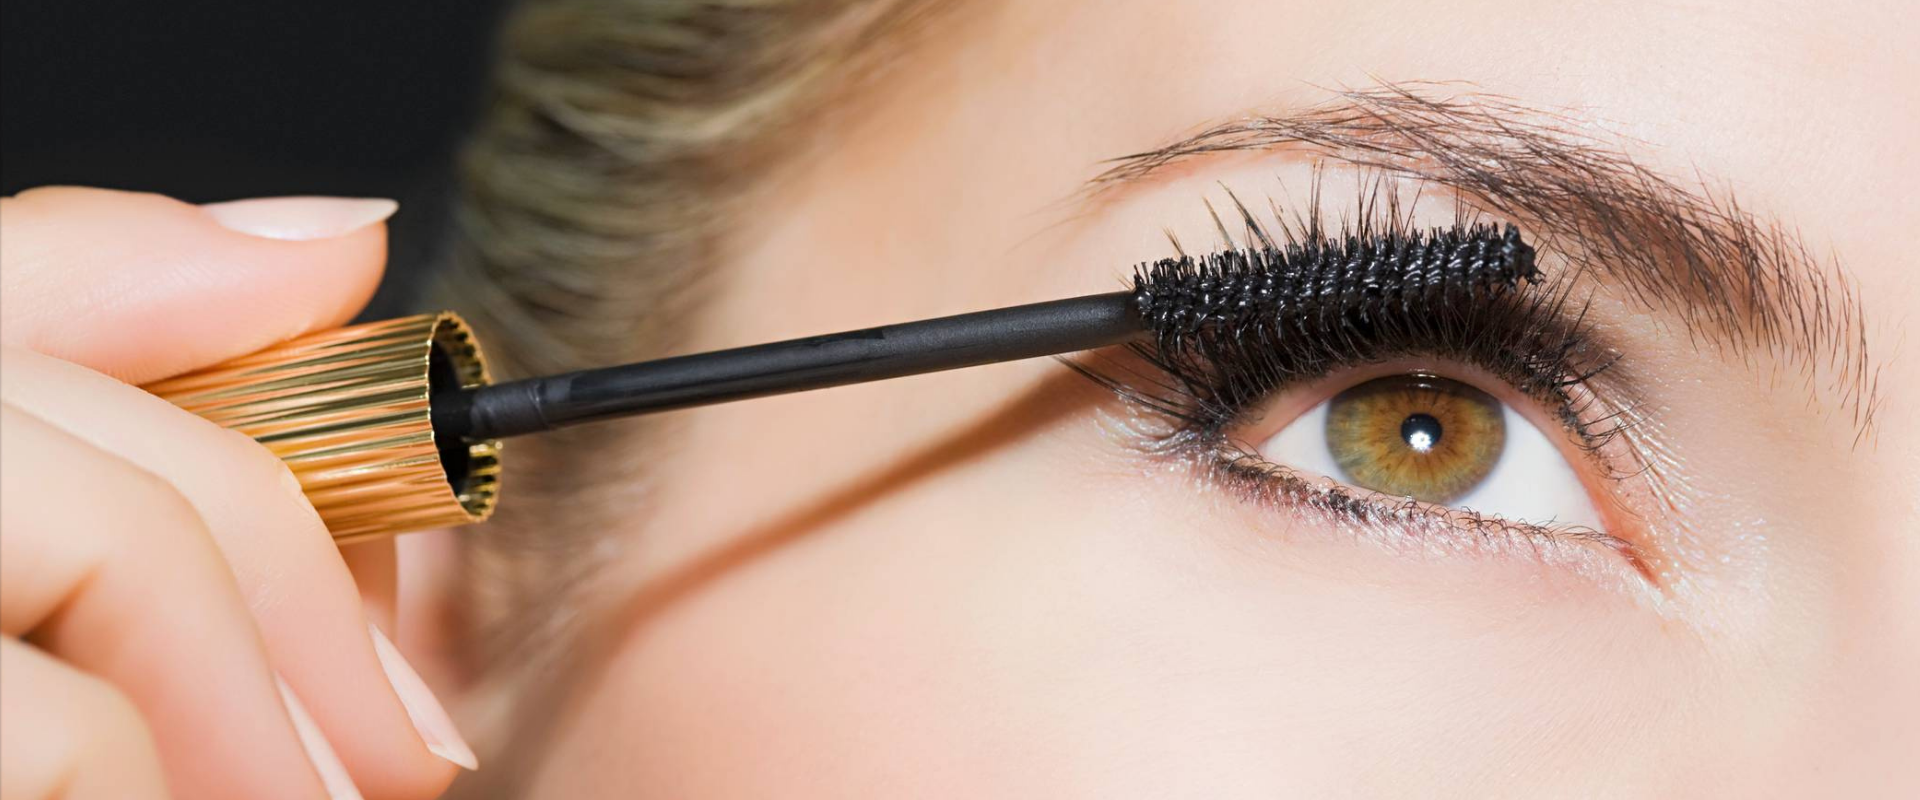 The 6 Best Mascaras of the Moment - Mascara for Volume Curl Natural Waterproof